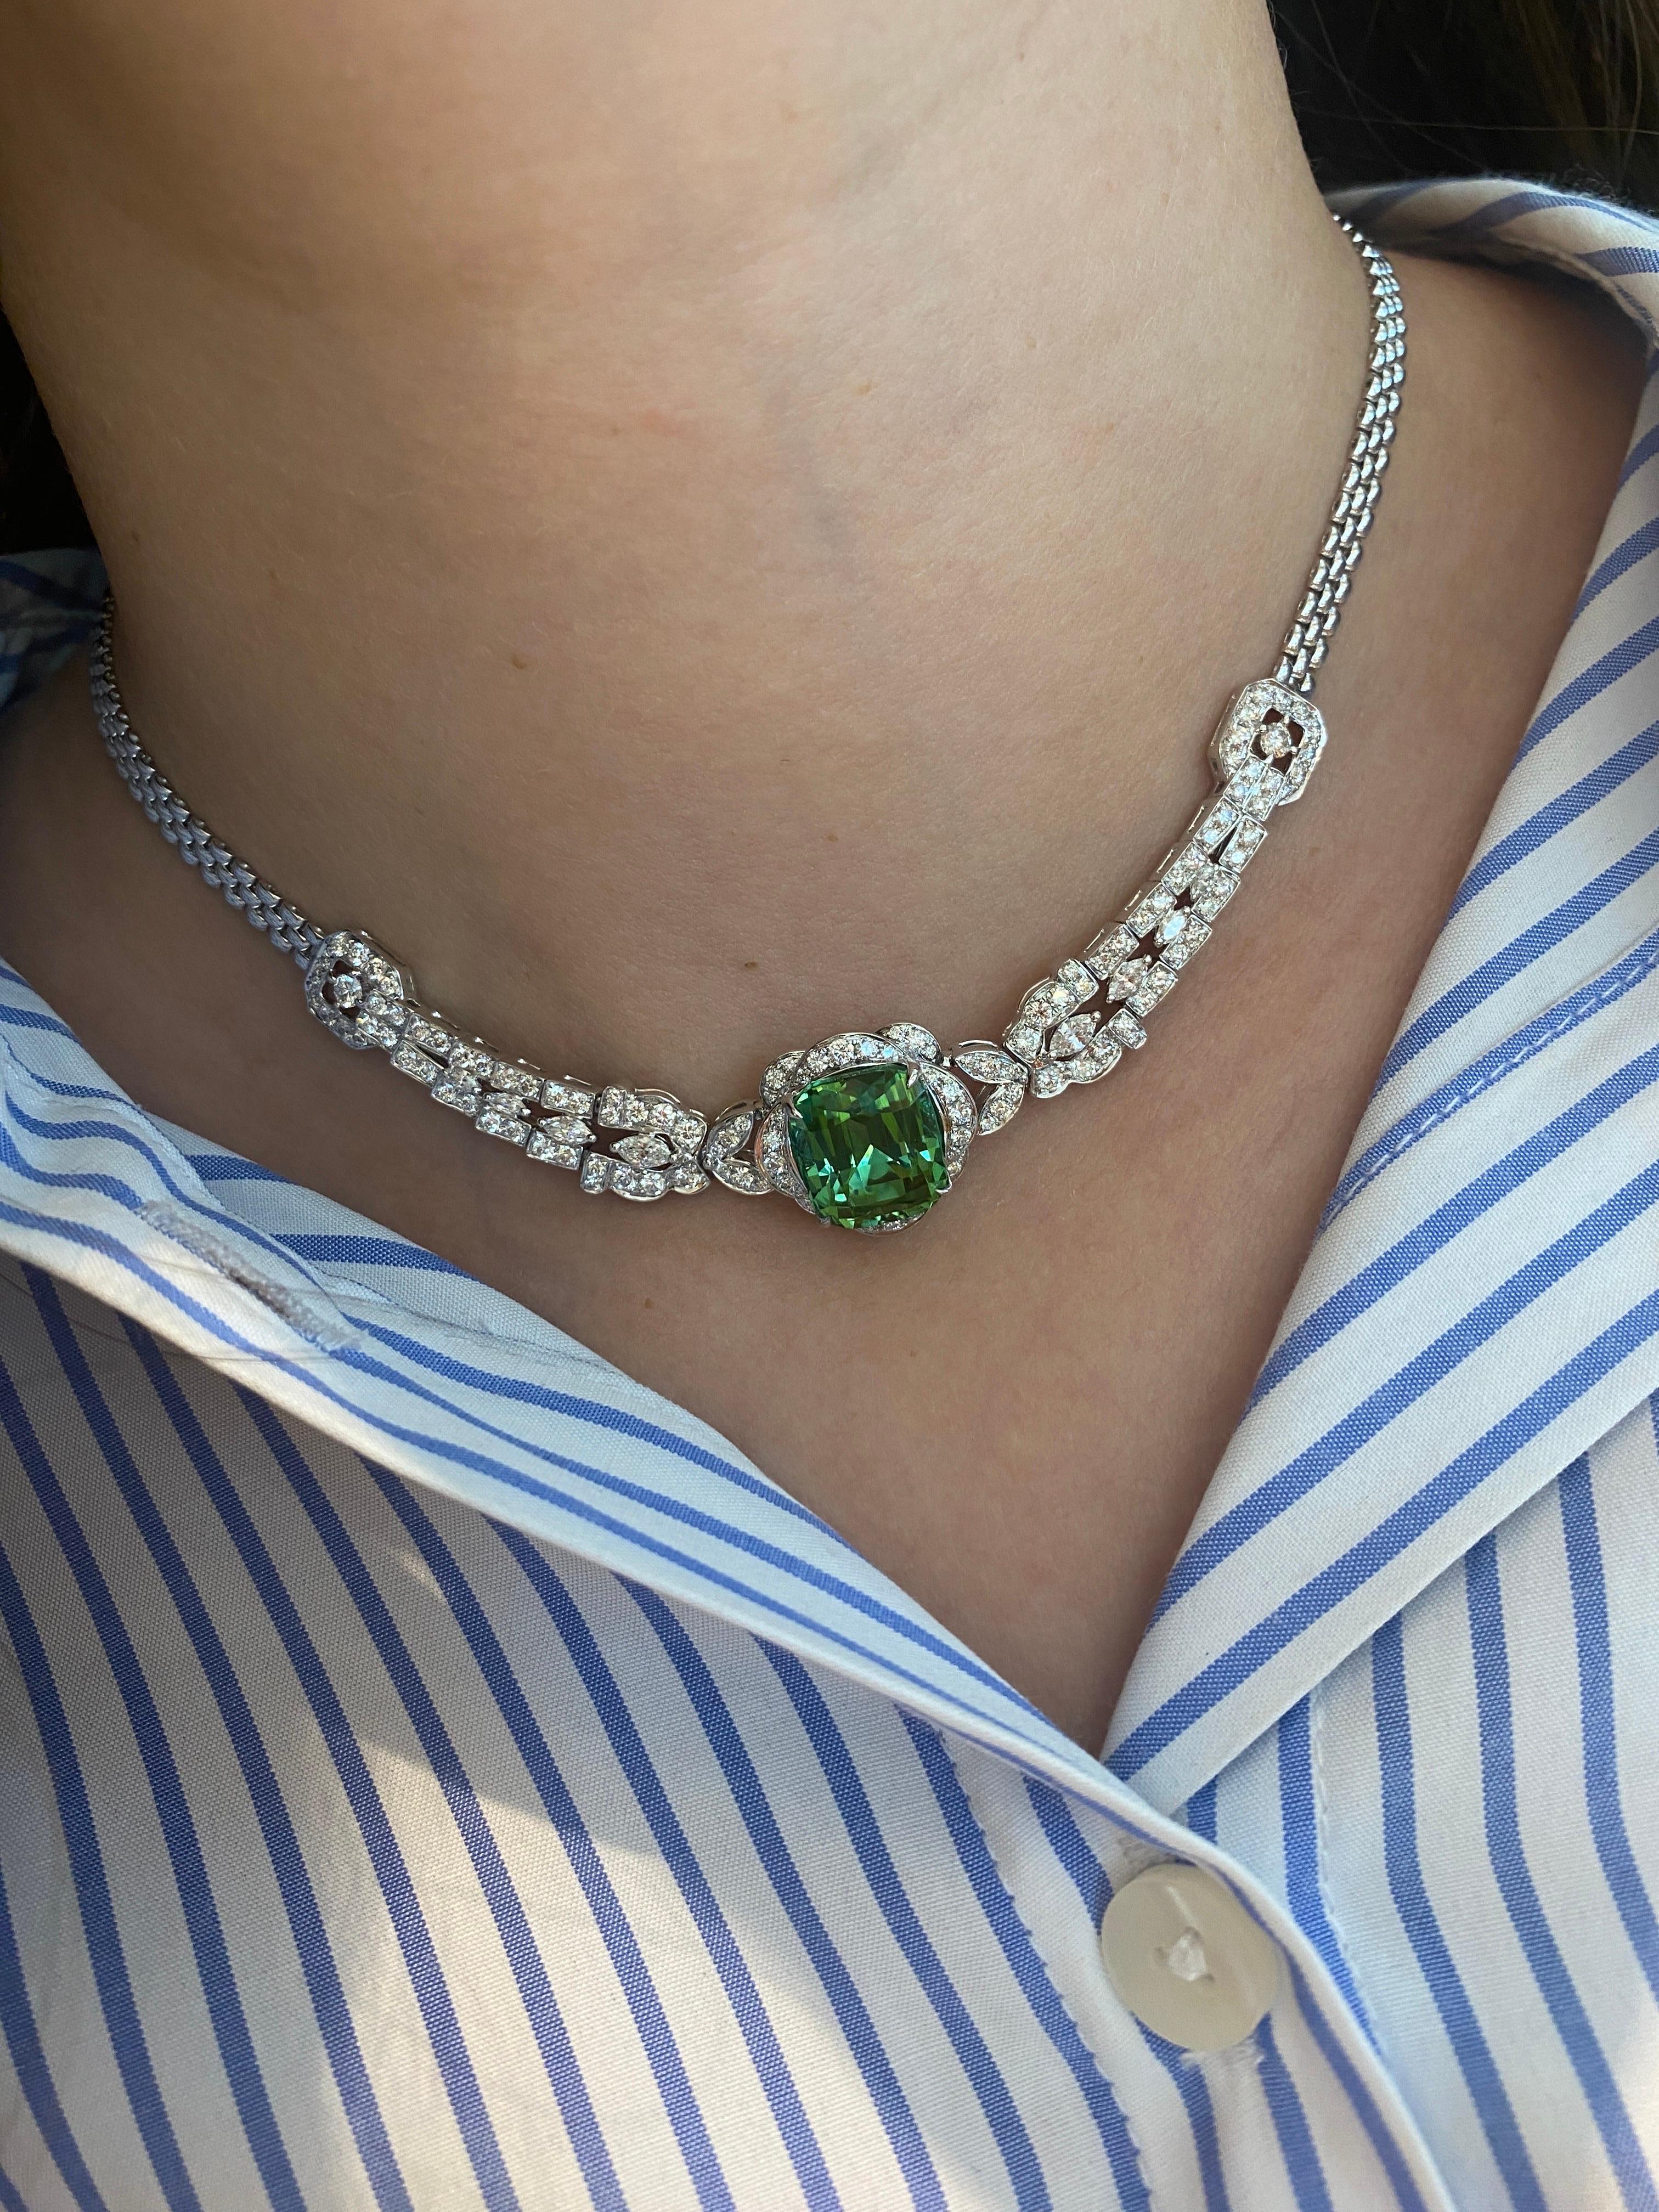 Introducing a stunning diamond necklace with a radiant tourmaline stone, exuding elegance and allure. A true masterpiece of refined luxury and timeless beauty.